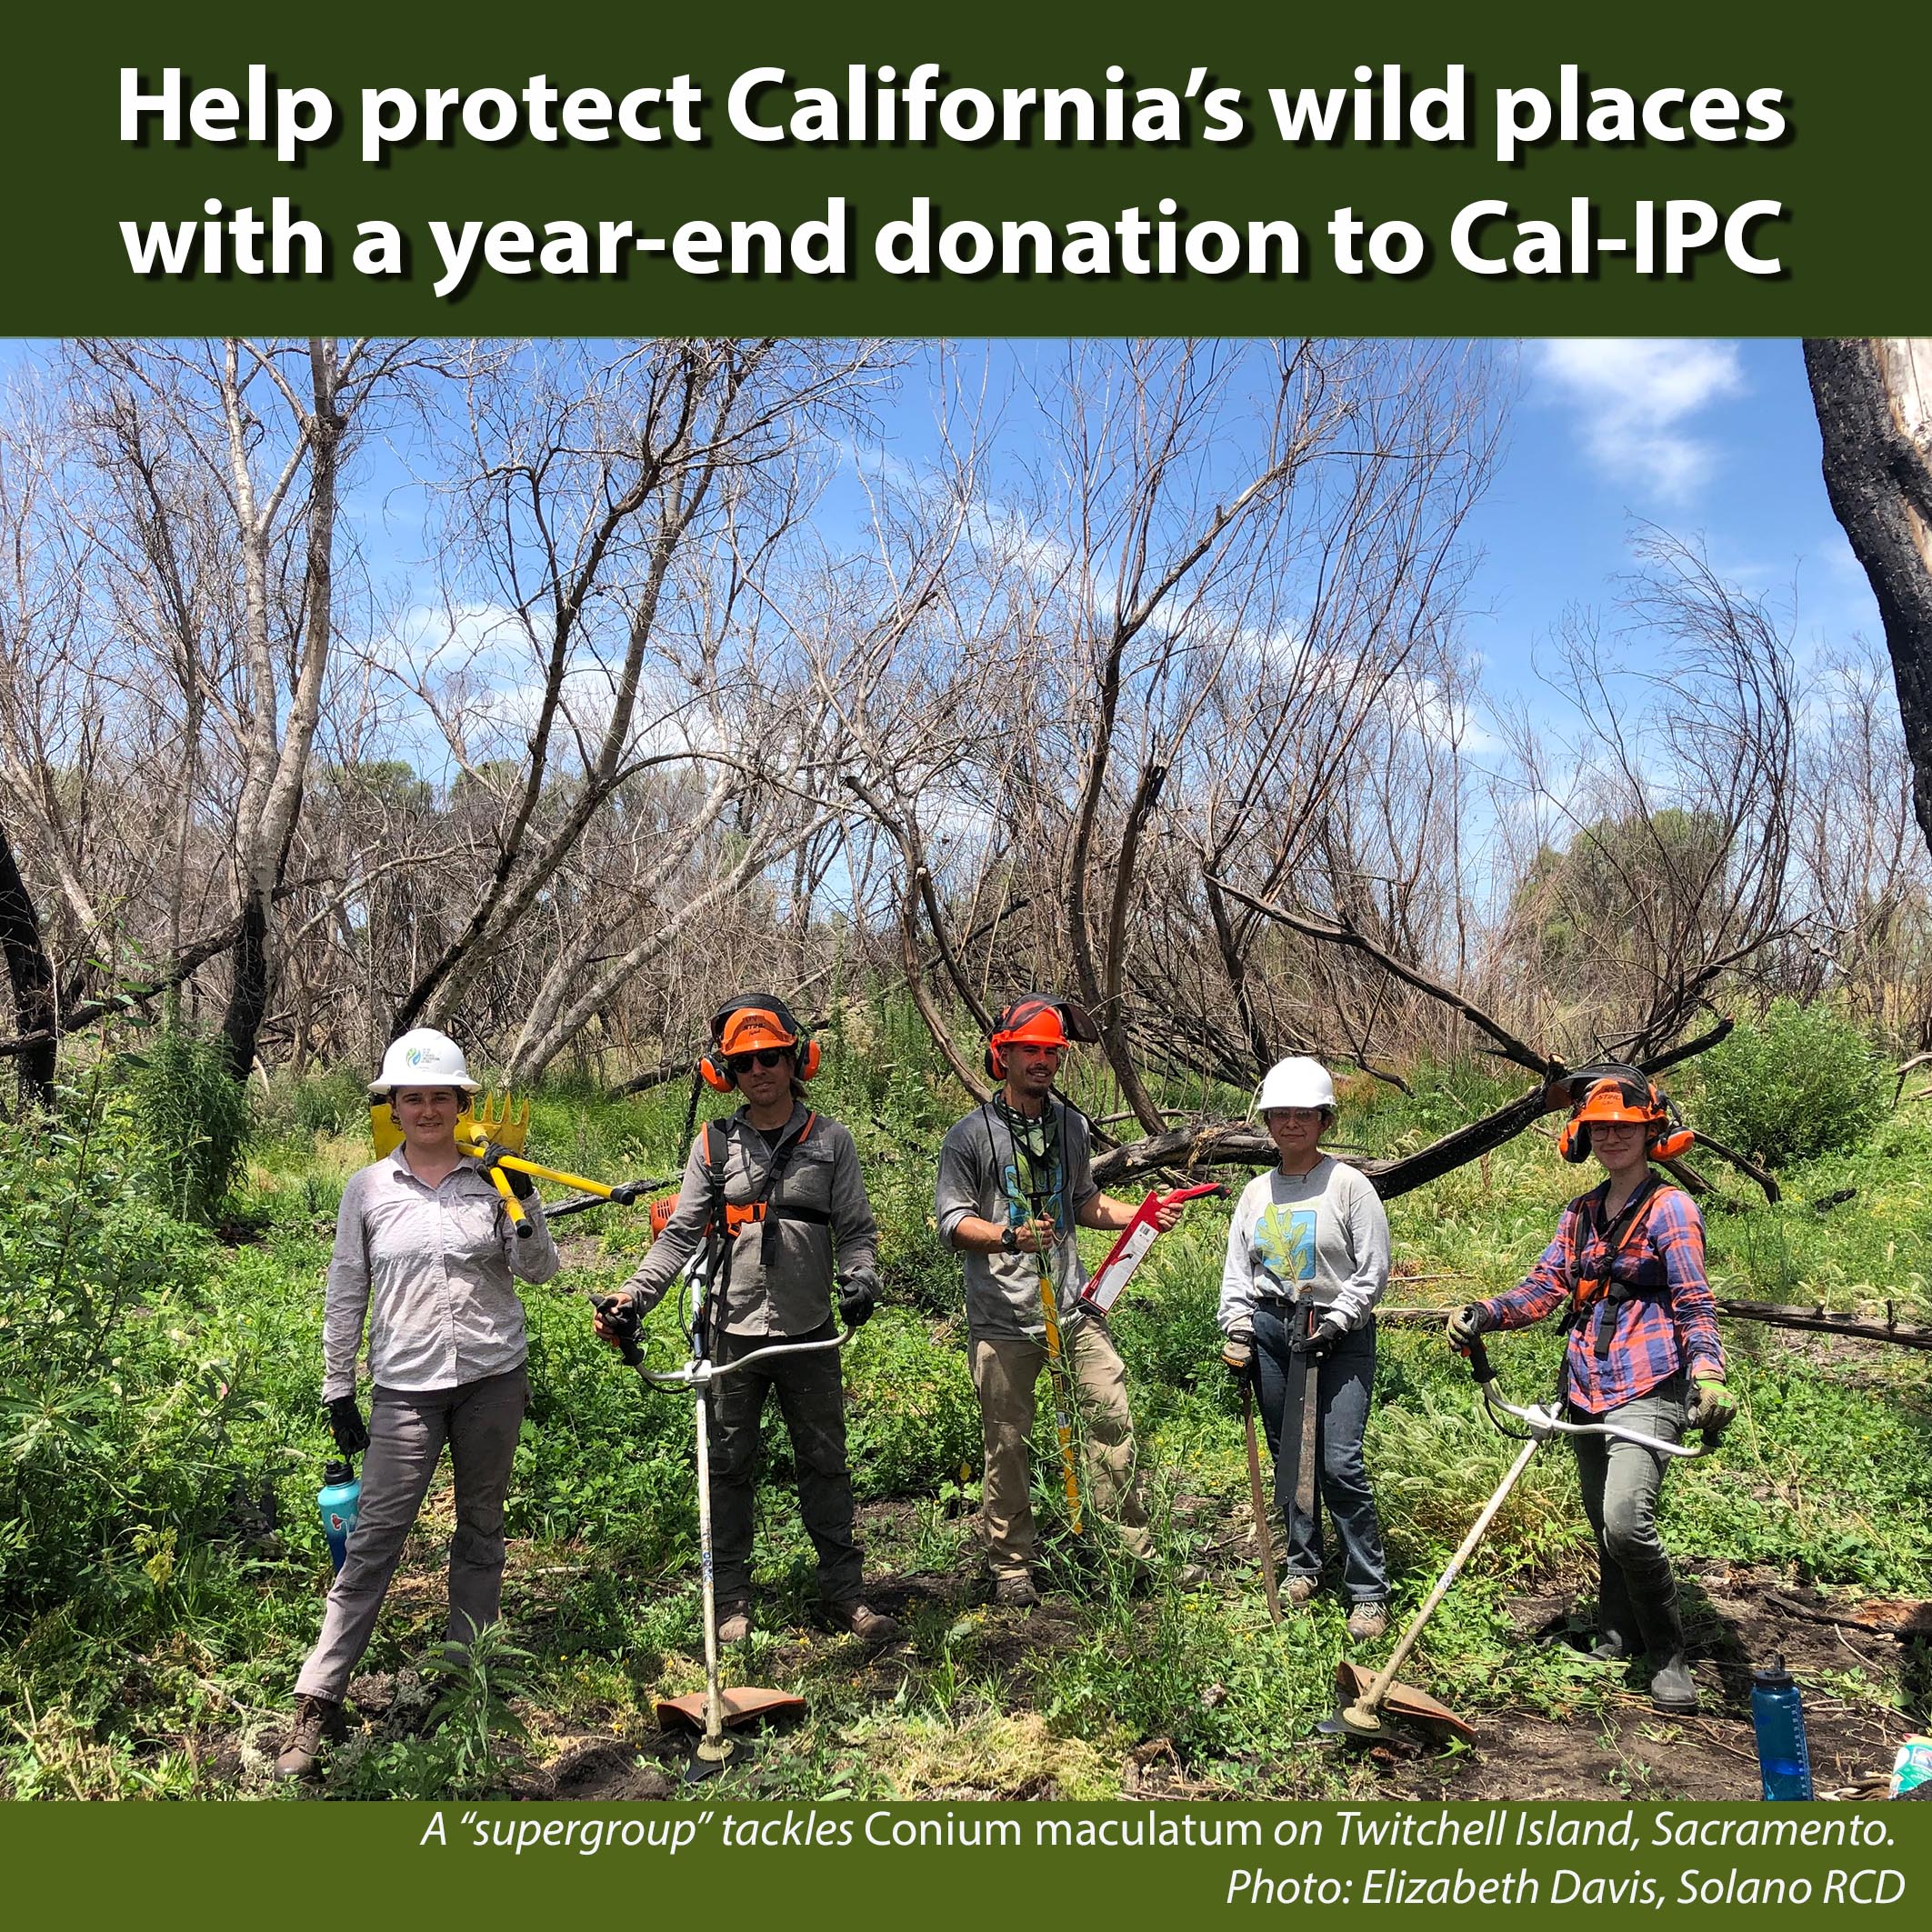 Five people in work gear and hardhats hold weedwhackers and stand in a green field under trees. Text overlay reads Help protect California's wild places with a year-end donation to Cal-IPC